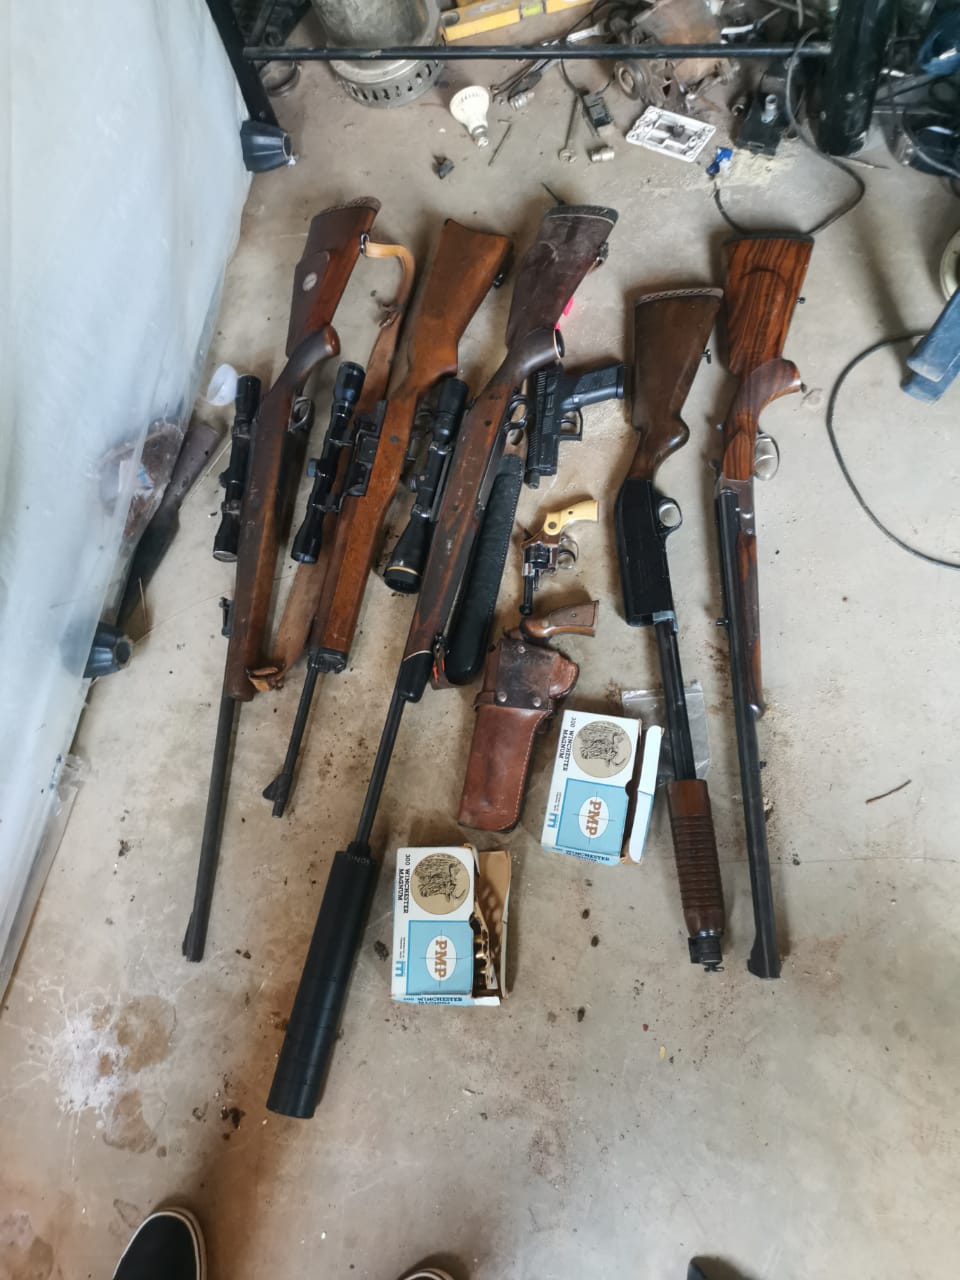 Police make breakthrough in arresting six house robbery (farm attack) suspects and recovering eight firearms, cash and other valuables